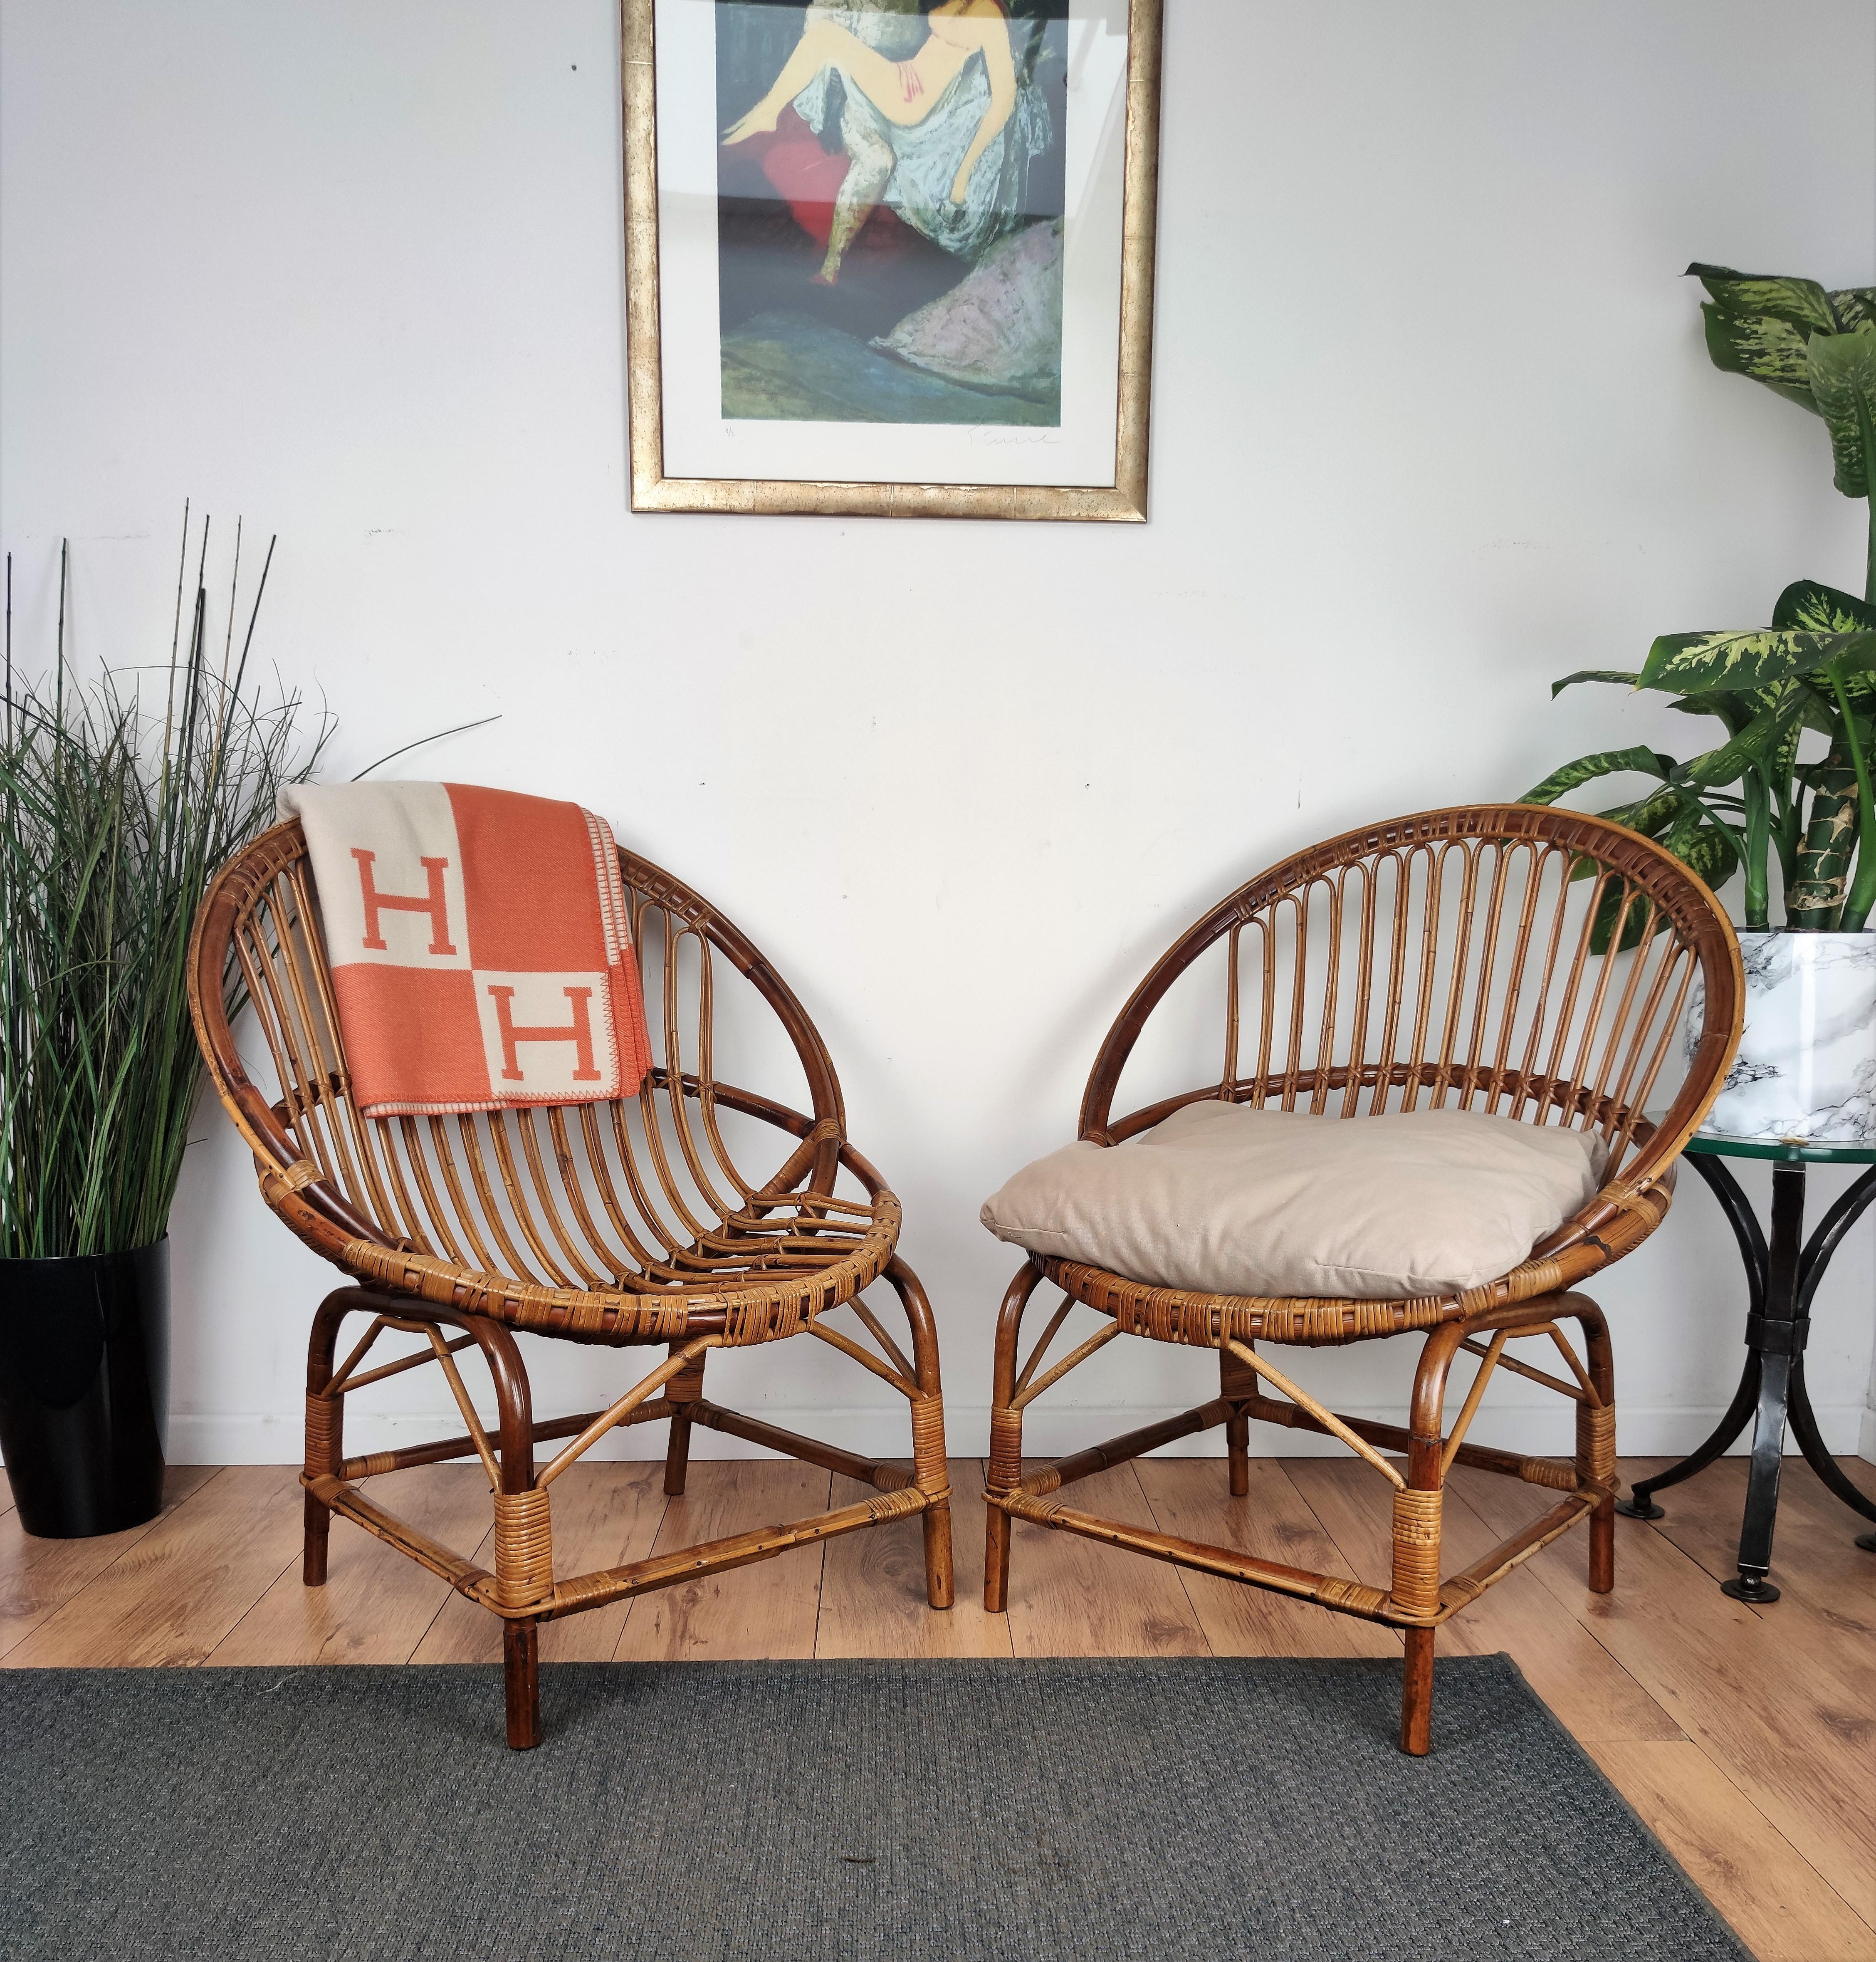 Beautiful 1960s Italian Mid-Century Modern pair of armchairs in rattan wicker bamboo with great design and shape. This charming lounge chairs are in the typical style of Franco Albini and Adrien Audoux where the organic beauty of the woven materials